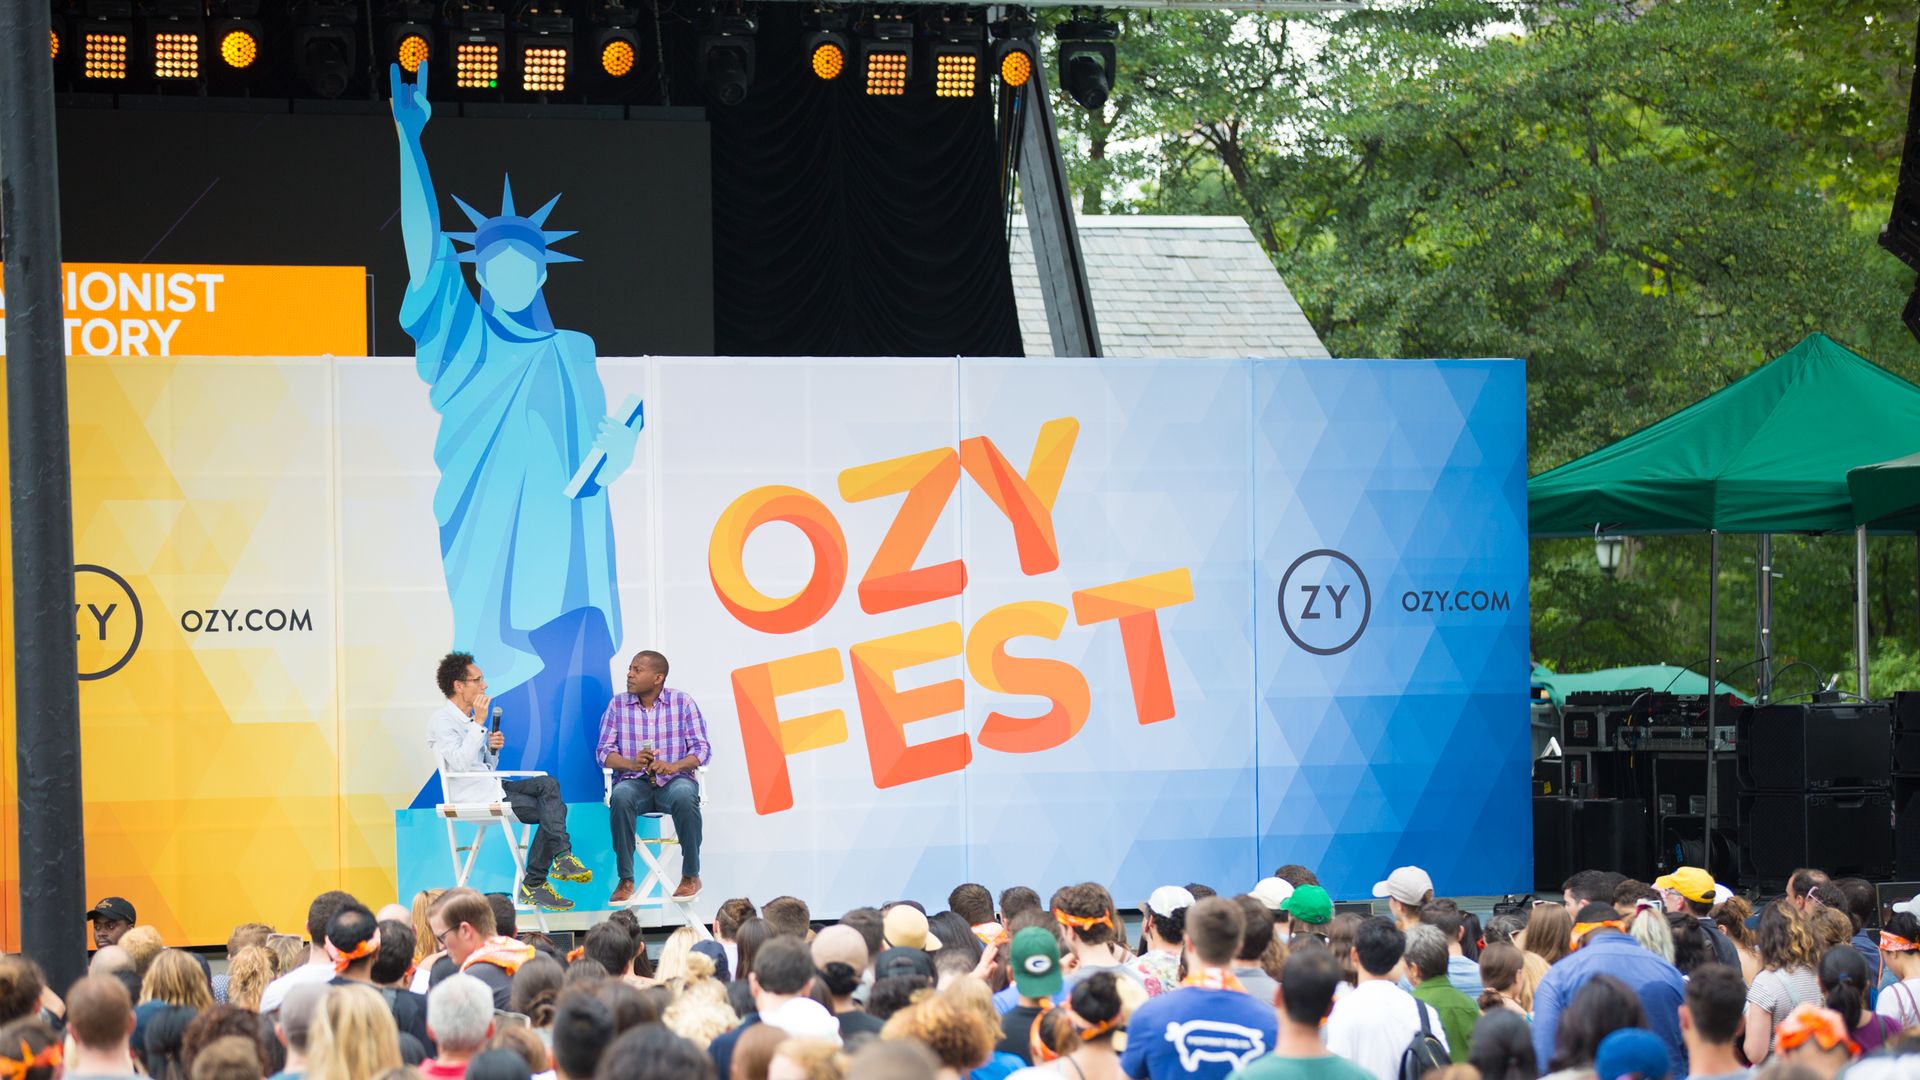 Carlos Watson interviewing Malcolm Gladwell at OZYfest